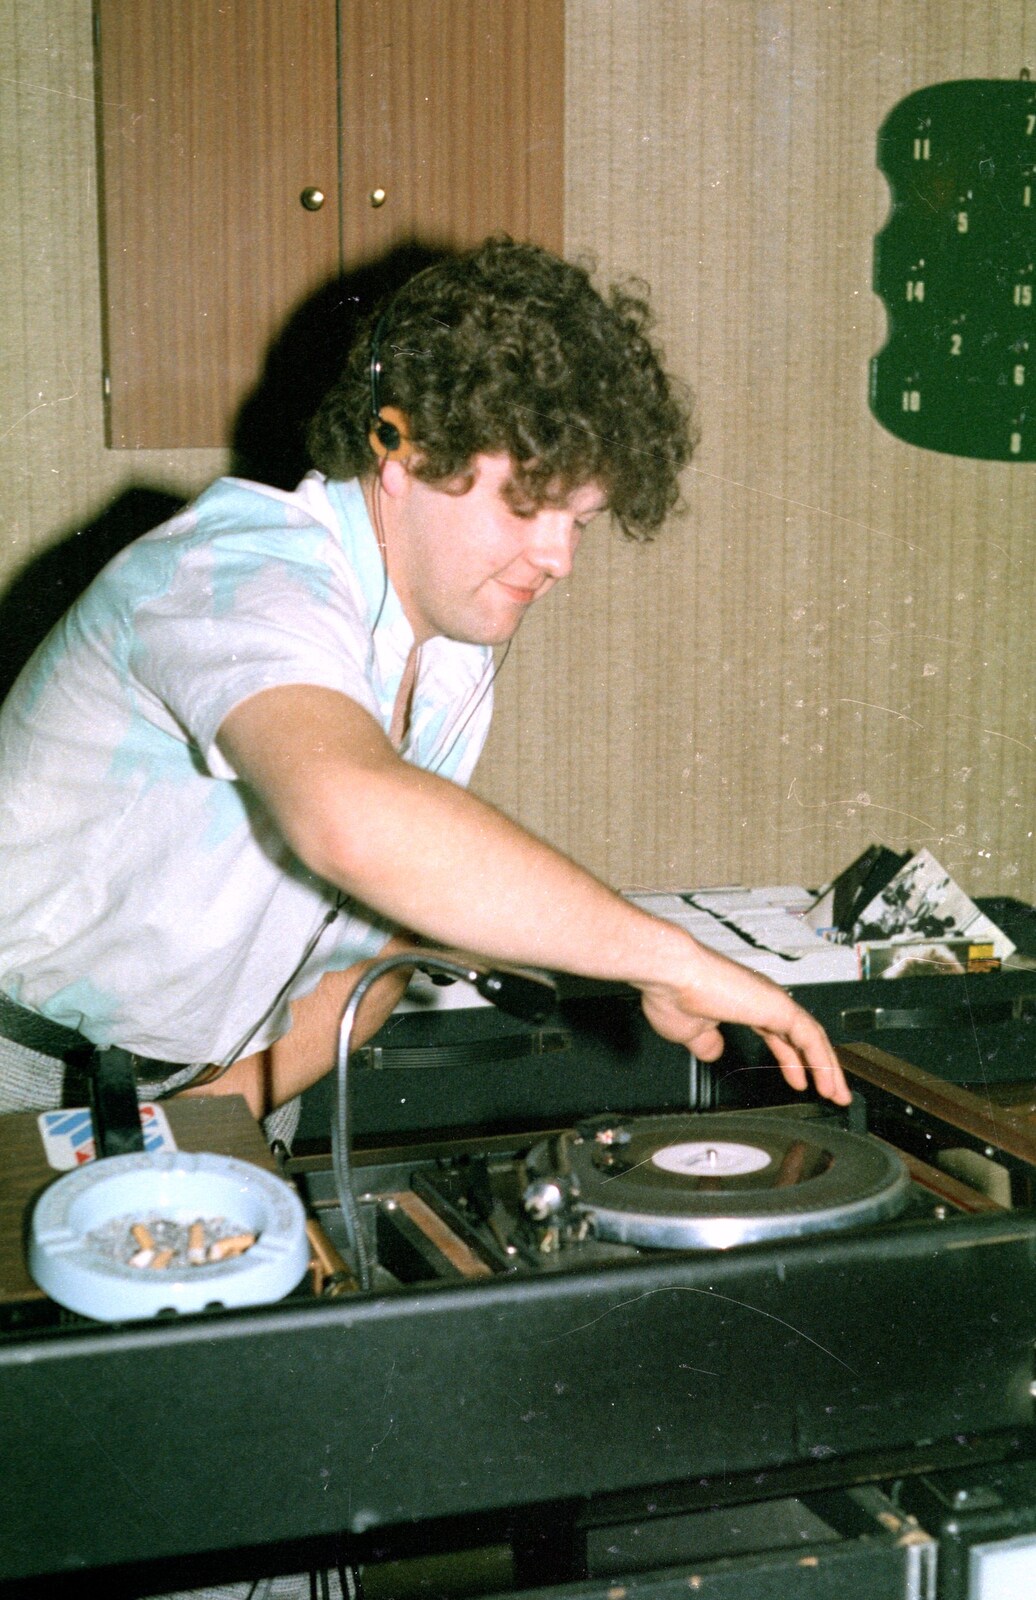 Carol's boyfriend spins up the 45s from A CB Wedding and a Derelict Railway, Hampshire - 20th July 1986